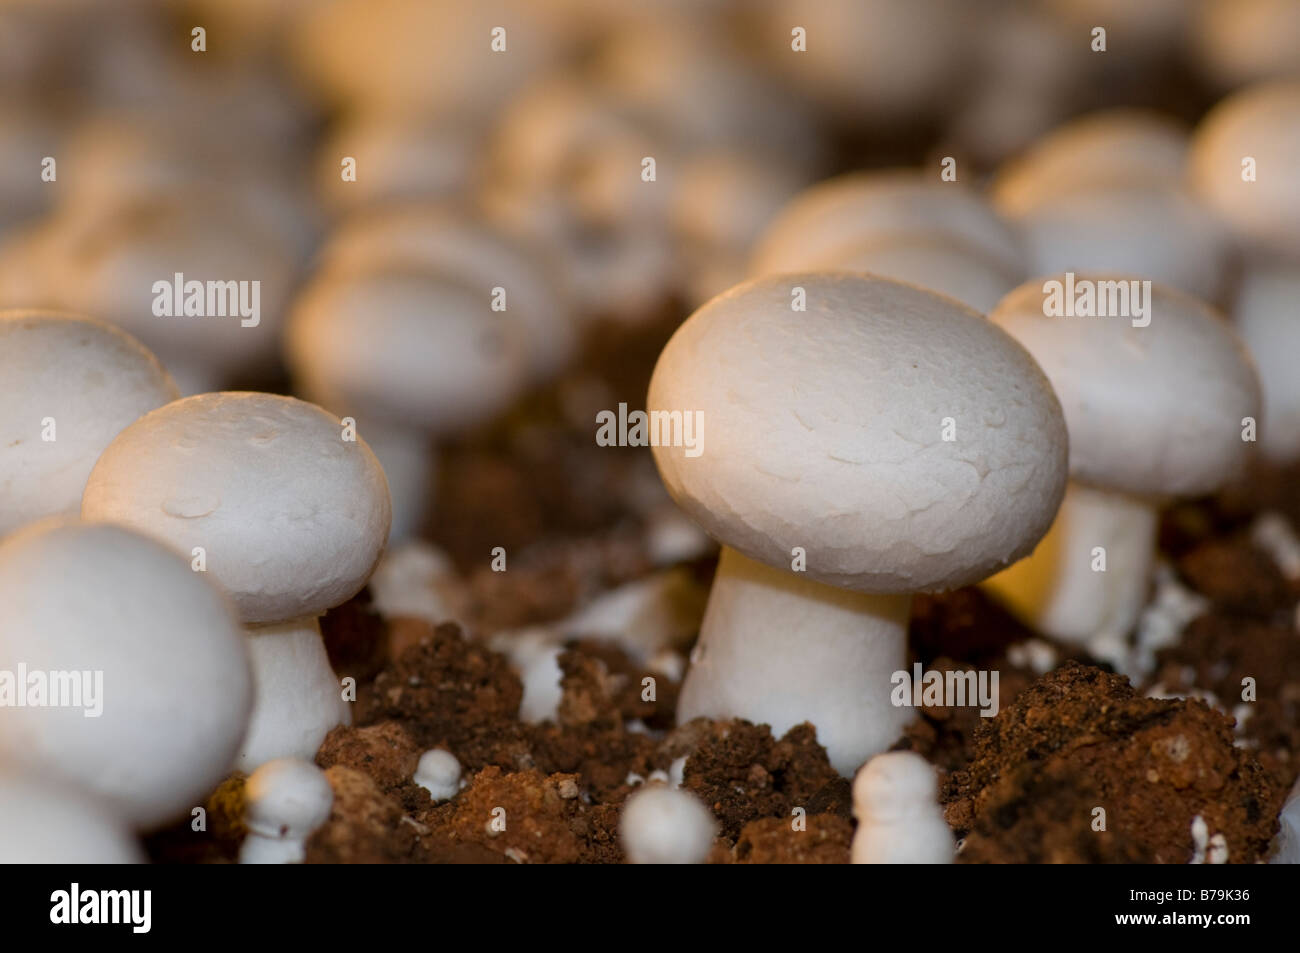 edible mushrooms in commercial farming Stock Photo